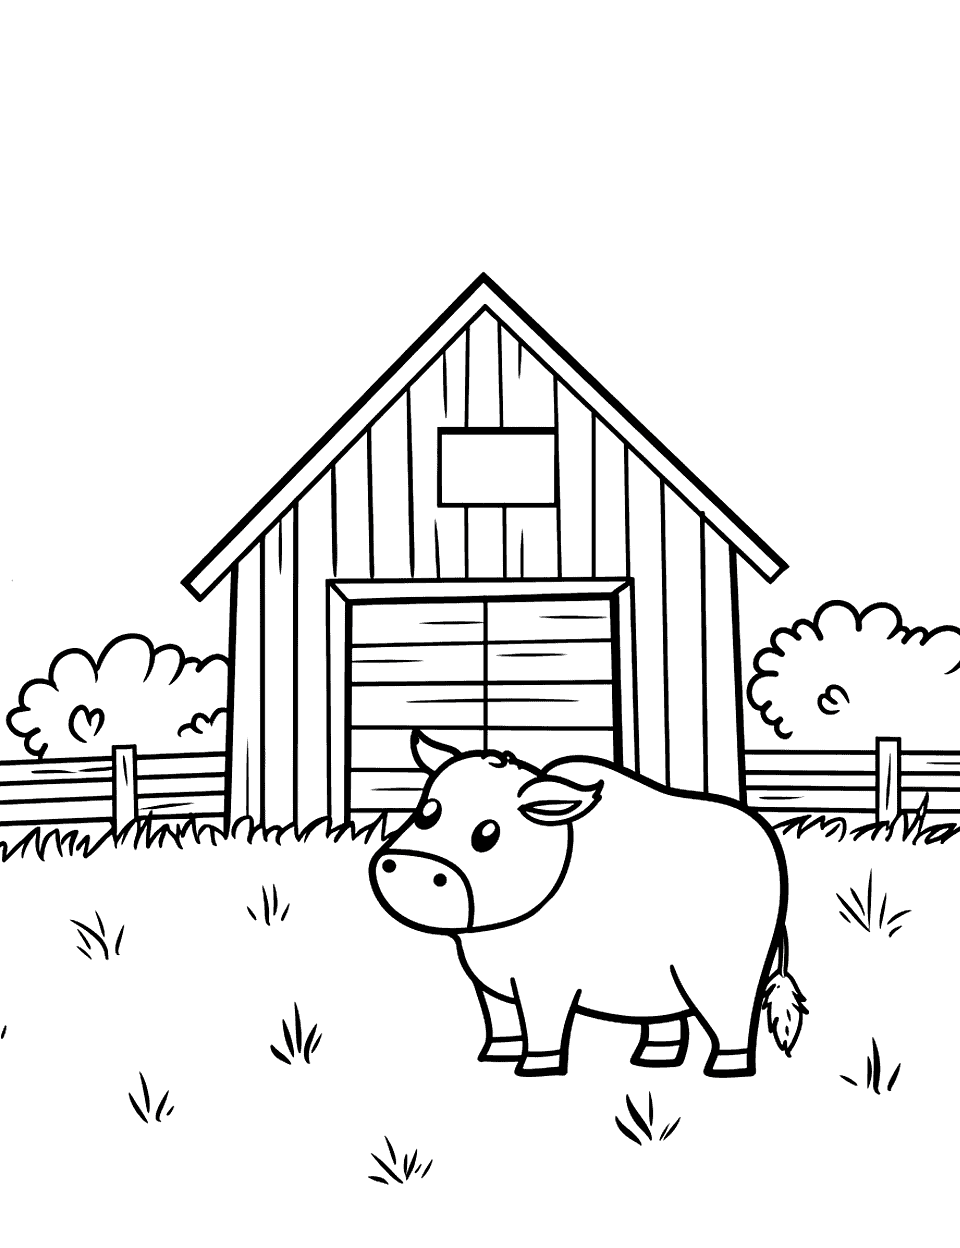 Farm Life Toddler Coloring Page - A simple scene of a barn with a single cow in front.